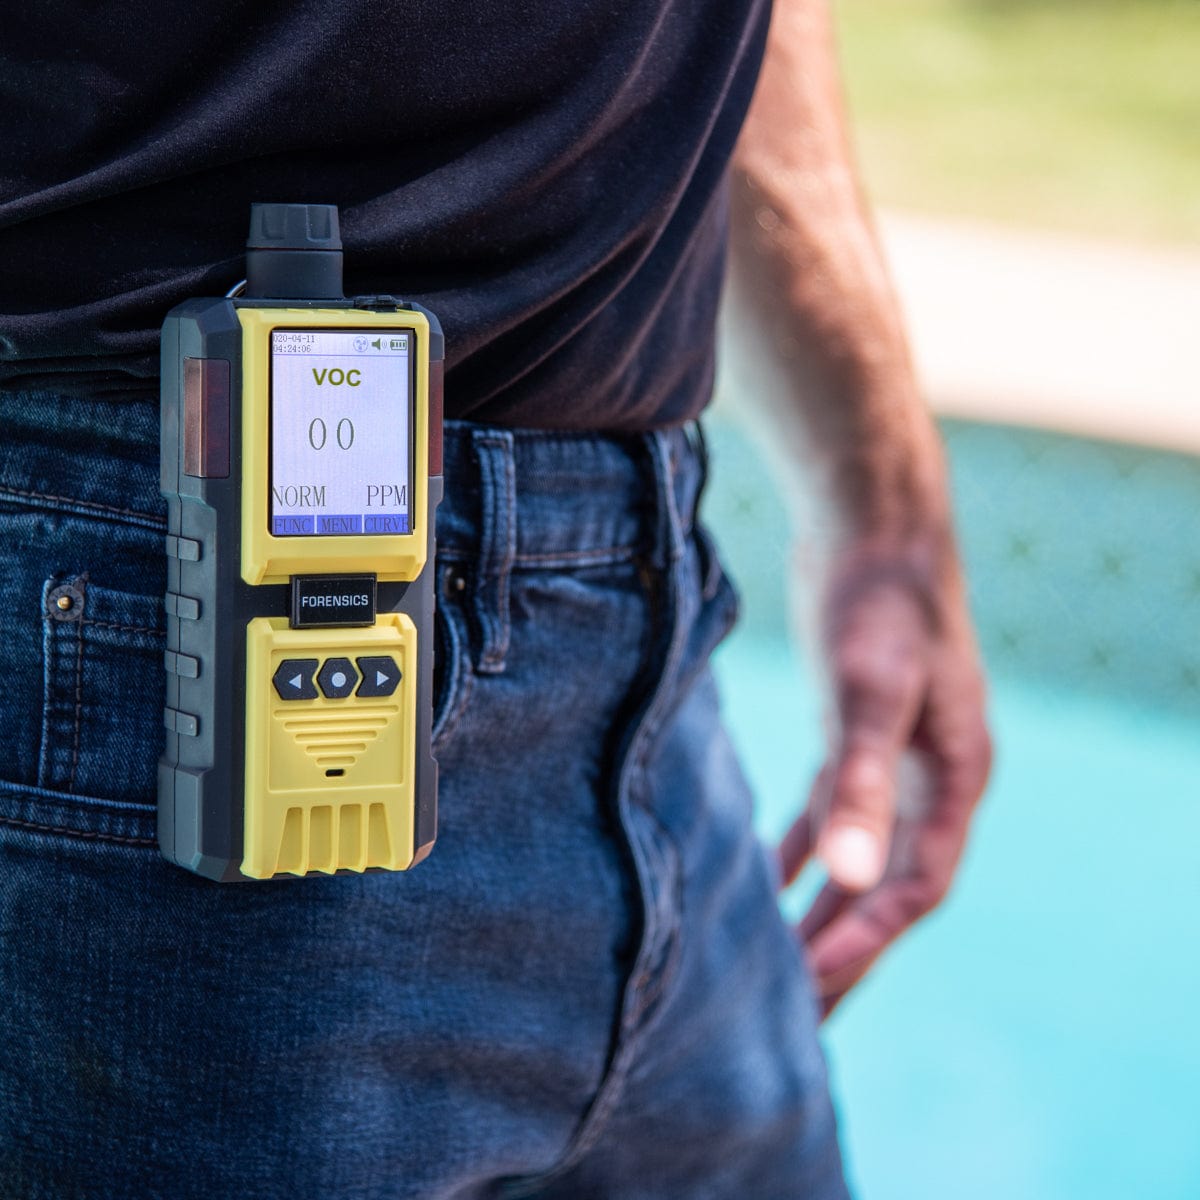 VOC Gas Detector for rapid, accurate detection of VOC